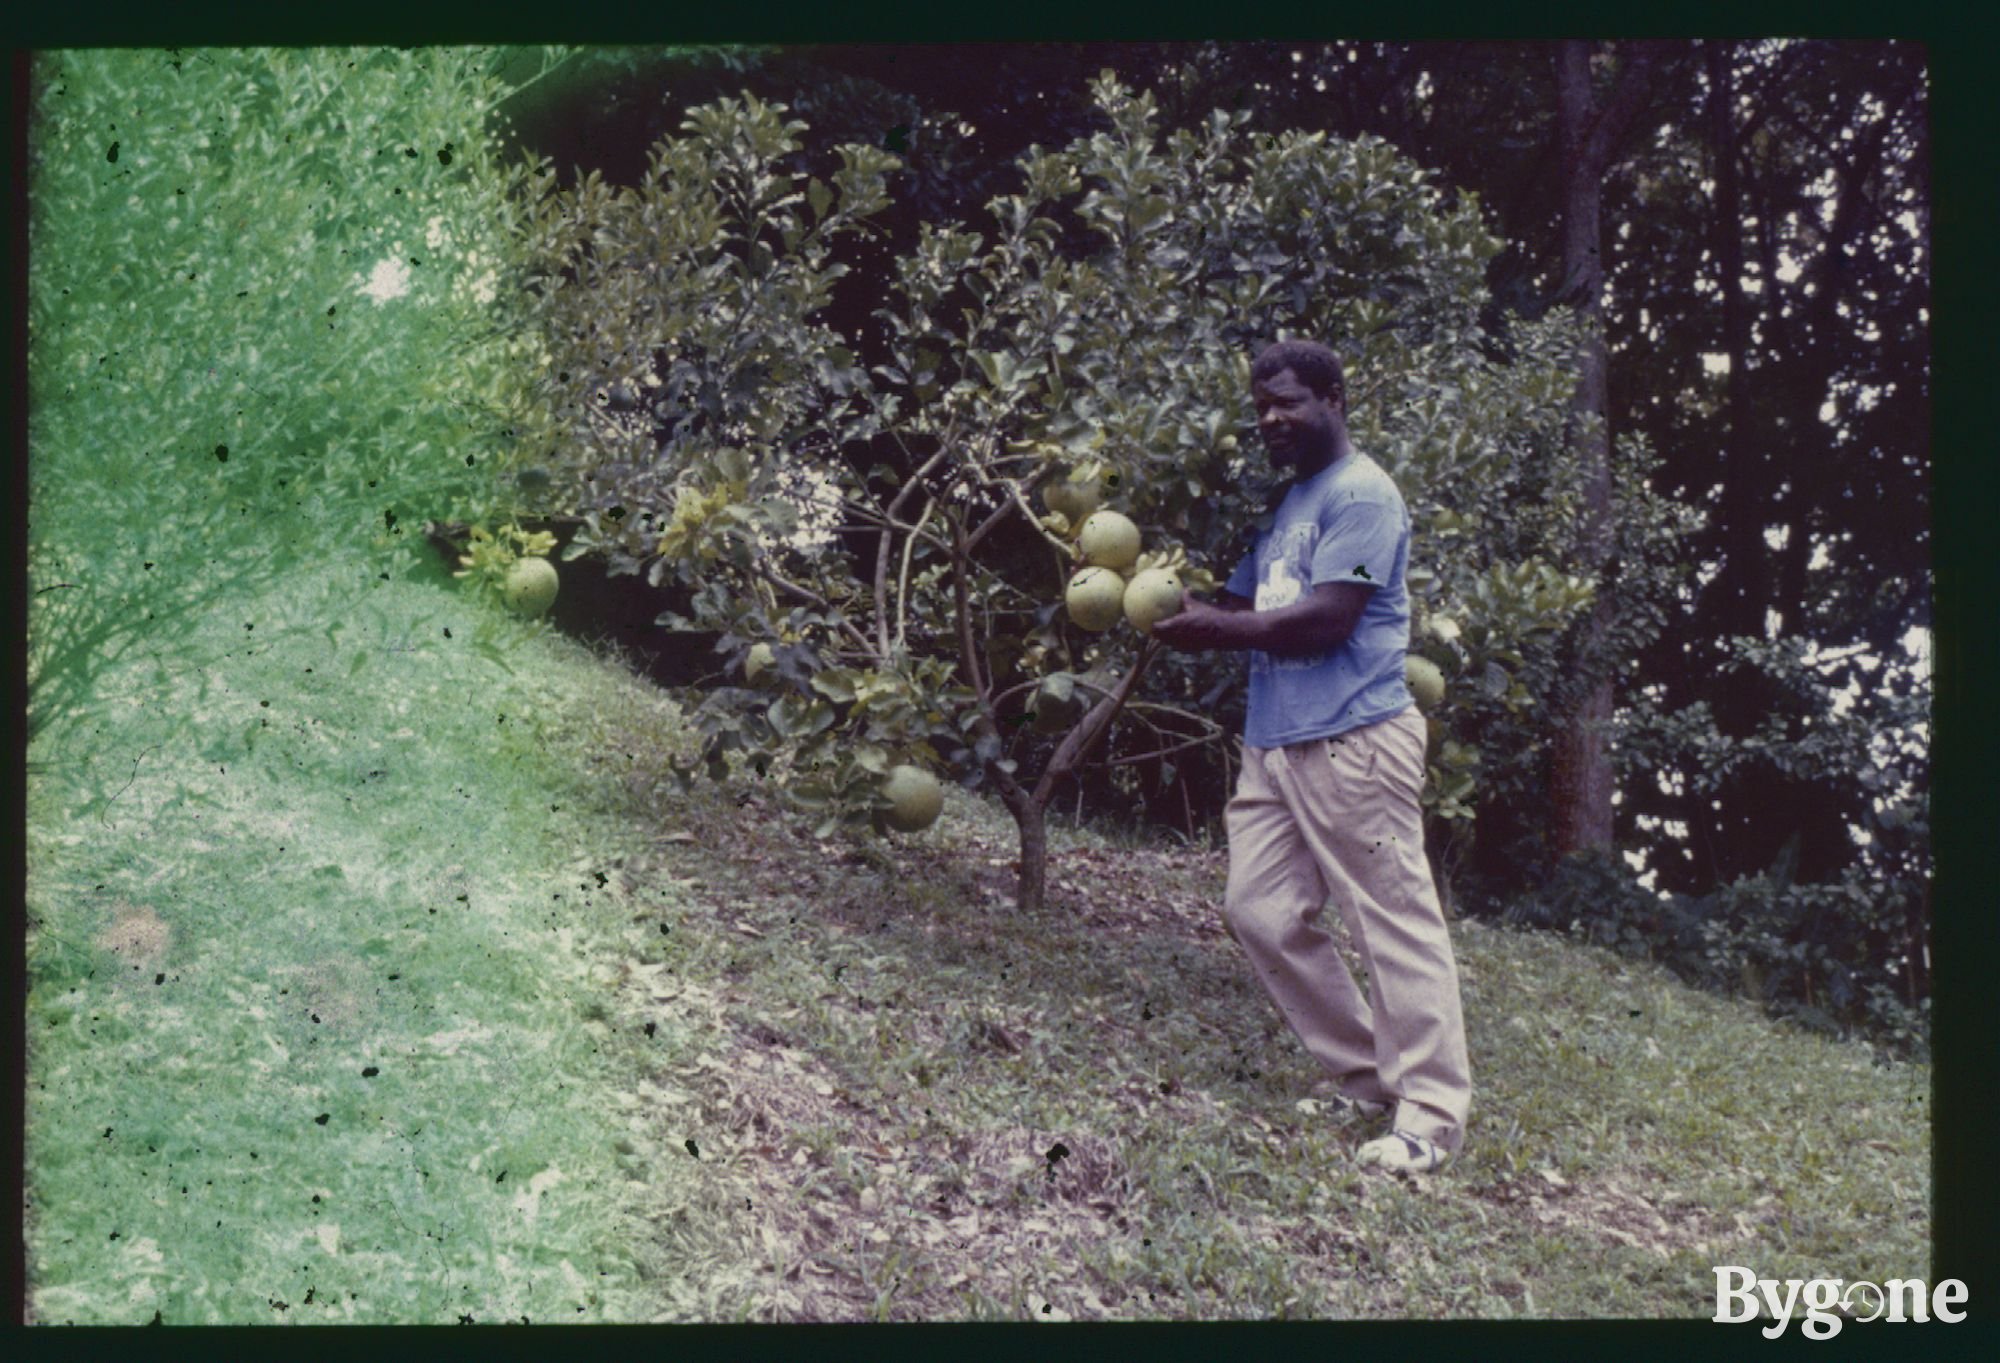 Man with Breadfruit - Growing Concerns